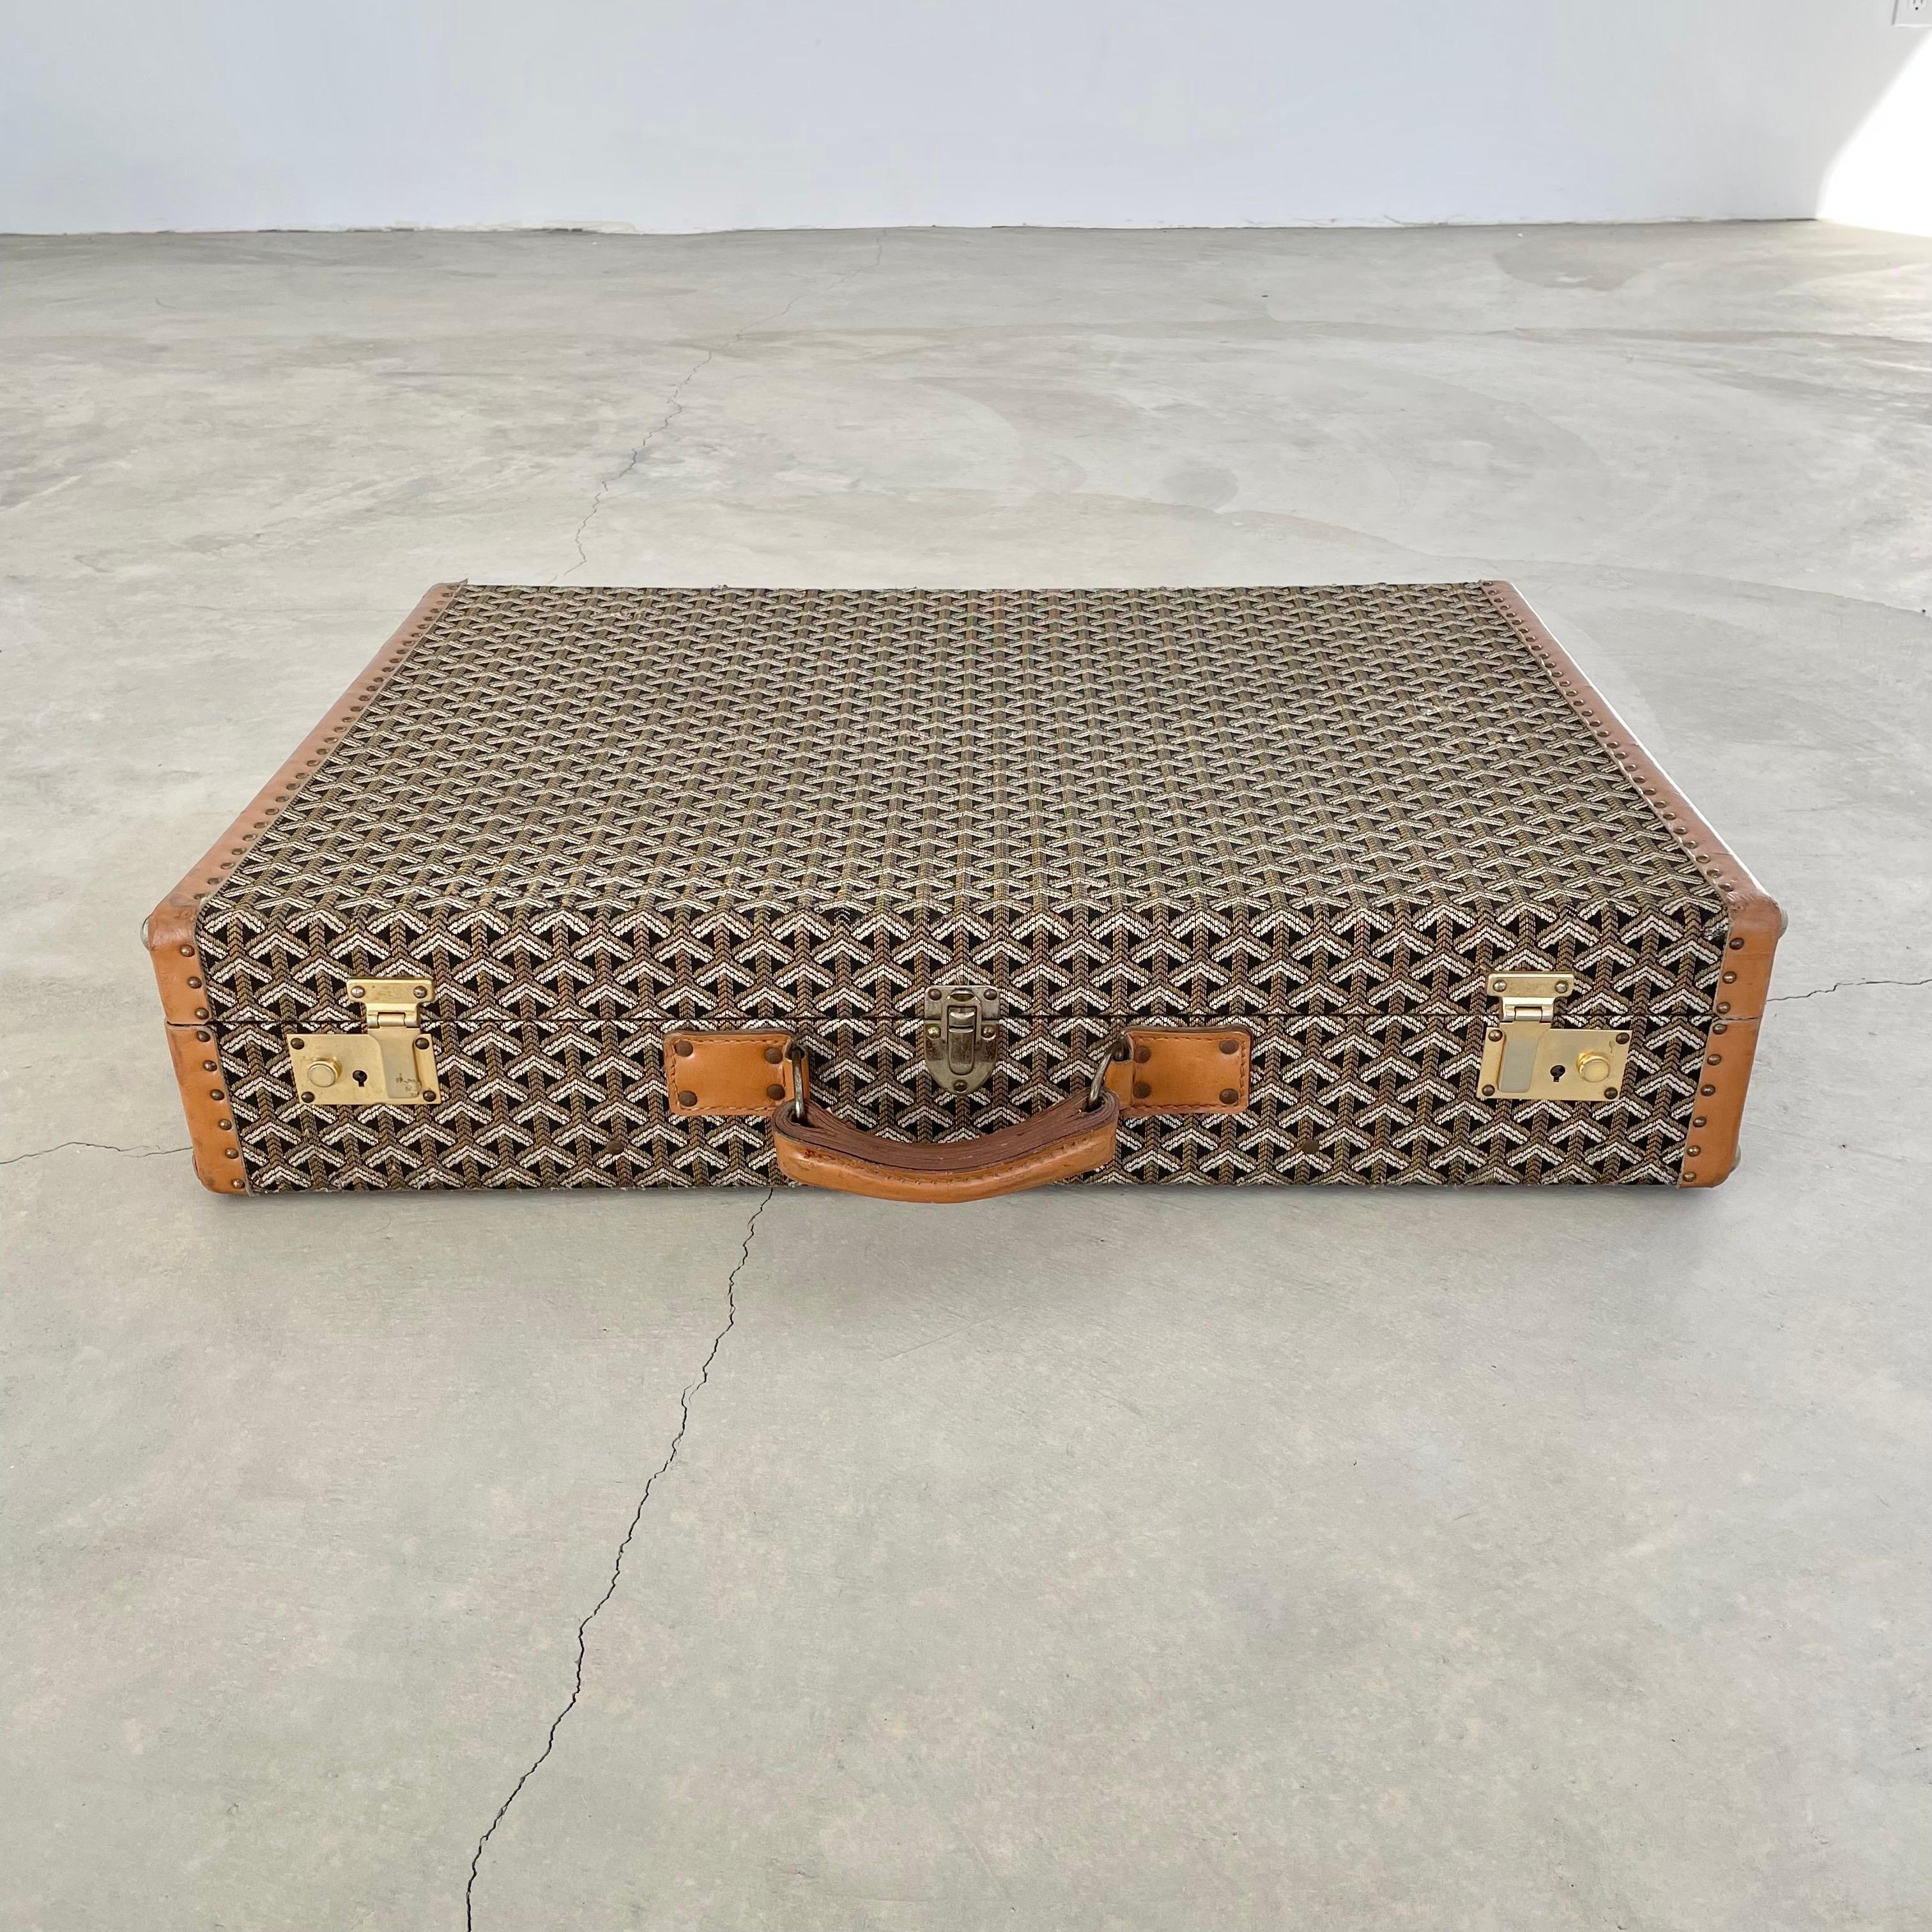 Classic vintage Goyard trunk with (Jacquard canvas) woven cotton canvas. Iconic Goyard print with saddle leather and brass hardware. Timeless simplicity in design and iconic badging have made this brand a staple of elegance since 1853. Initially